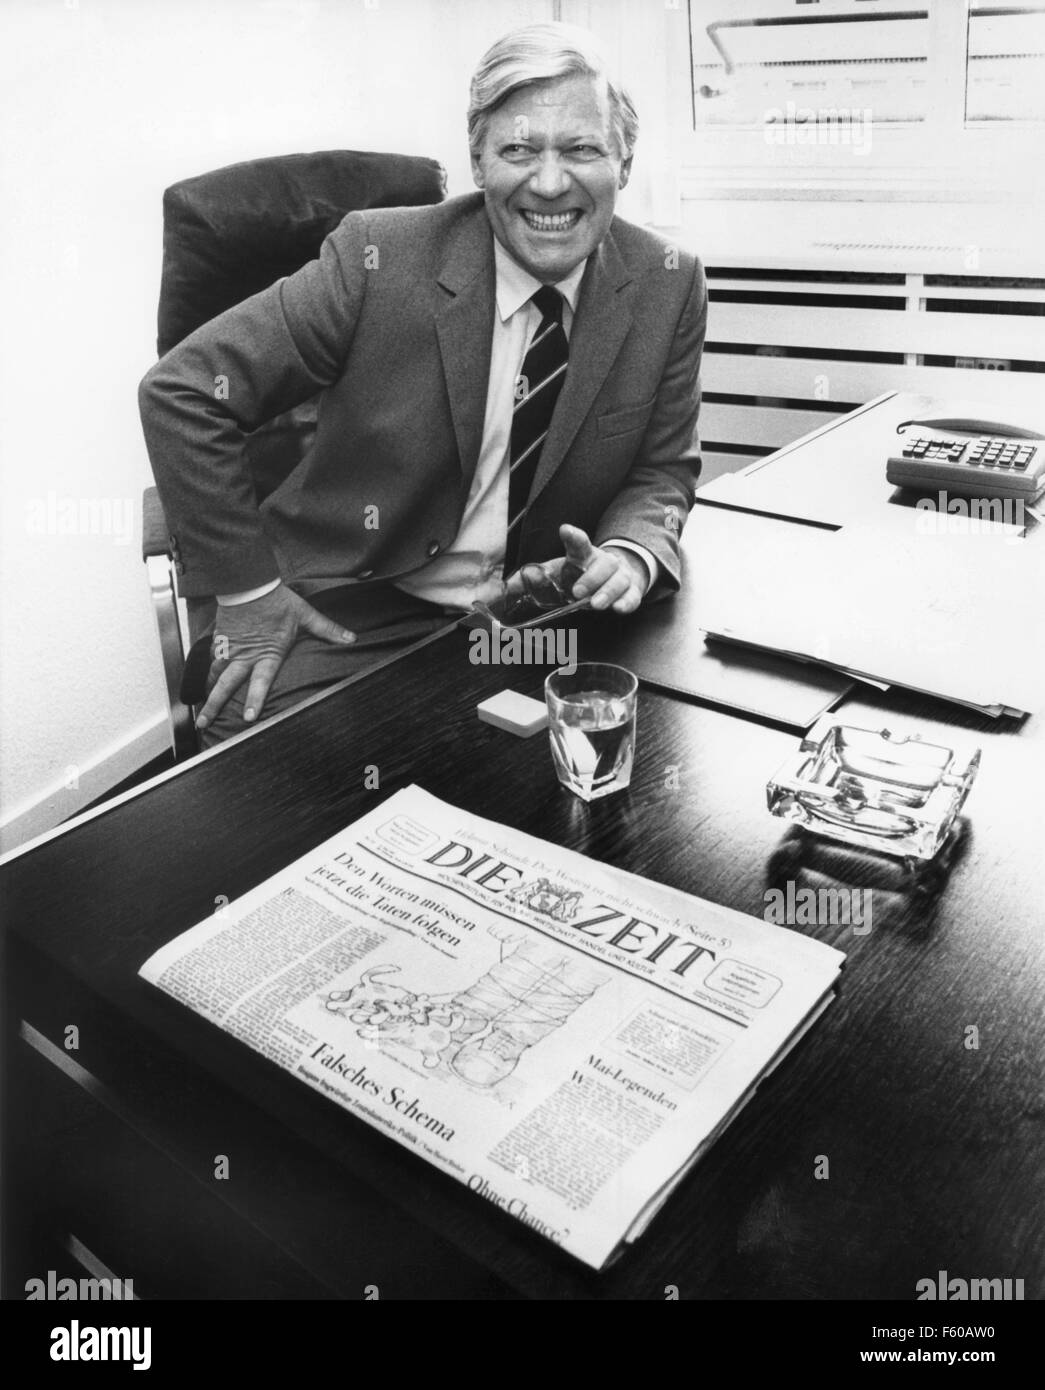 Former Chancellor Helmut Schmidt, new co-editor of 'Die Zeit' newspaper, at his office at Hamburg Pressehaus on 09 May 1983. Stock Photo